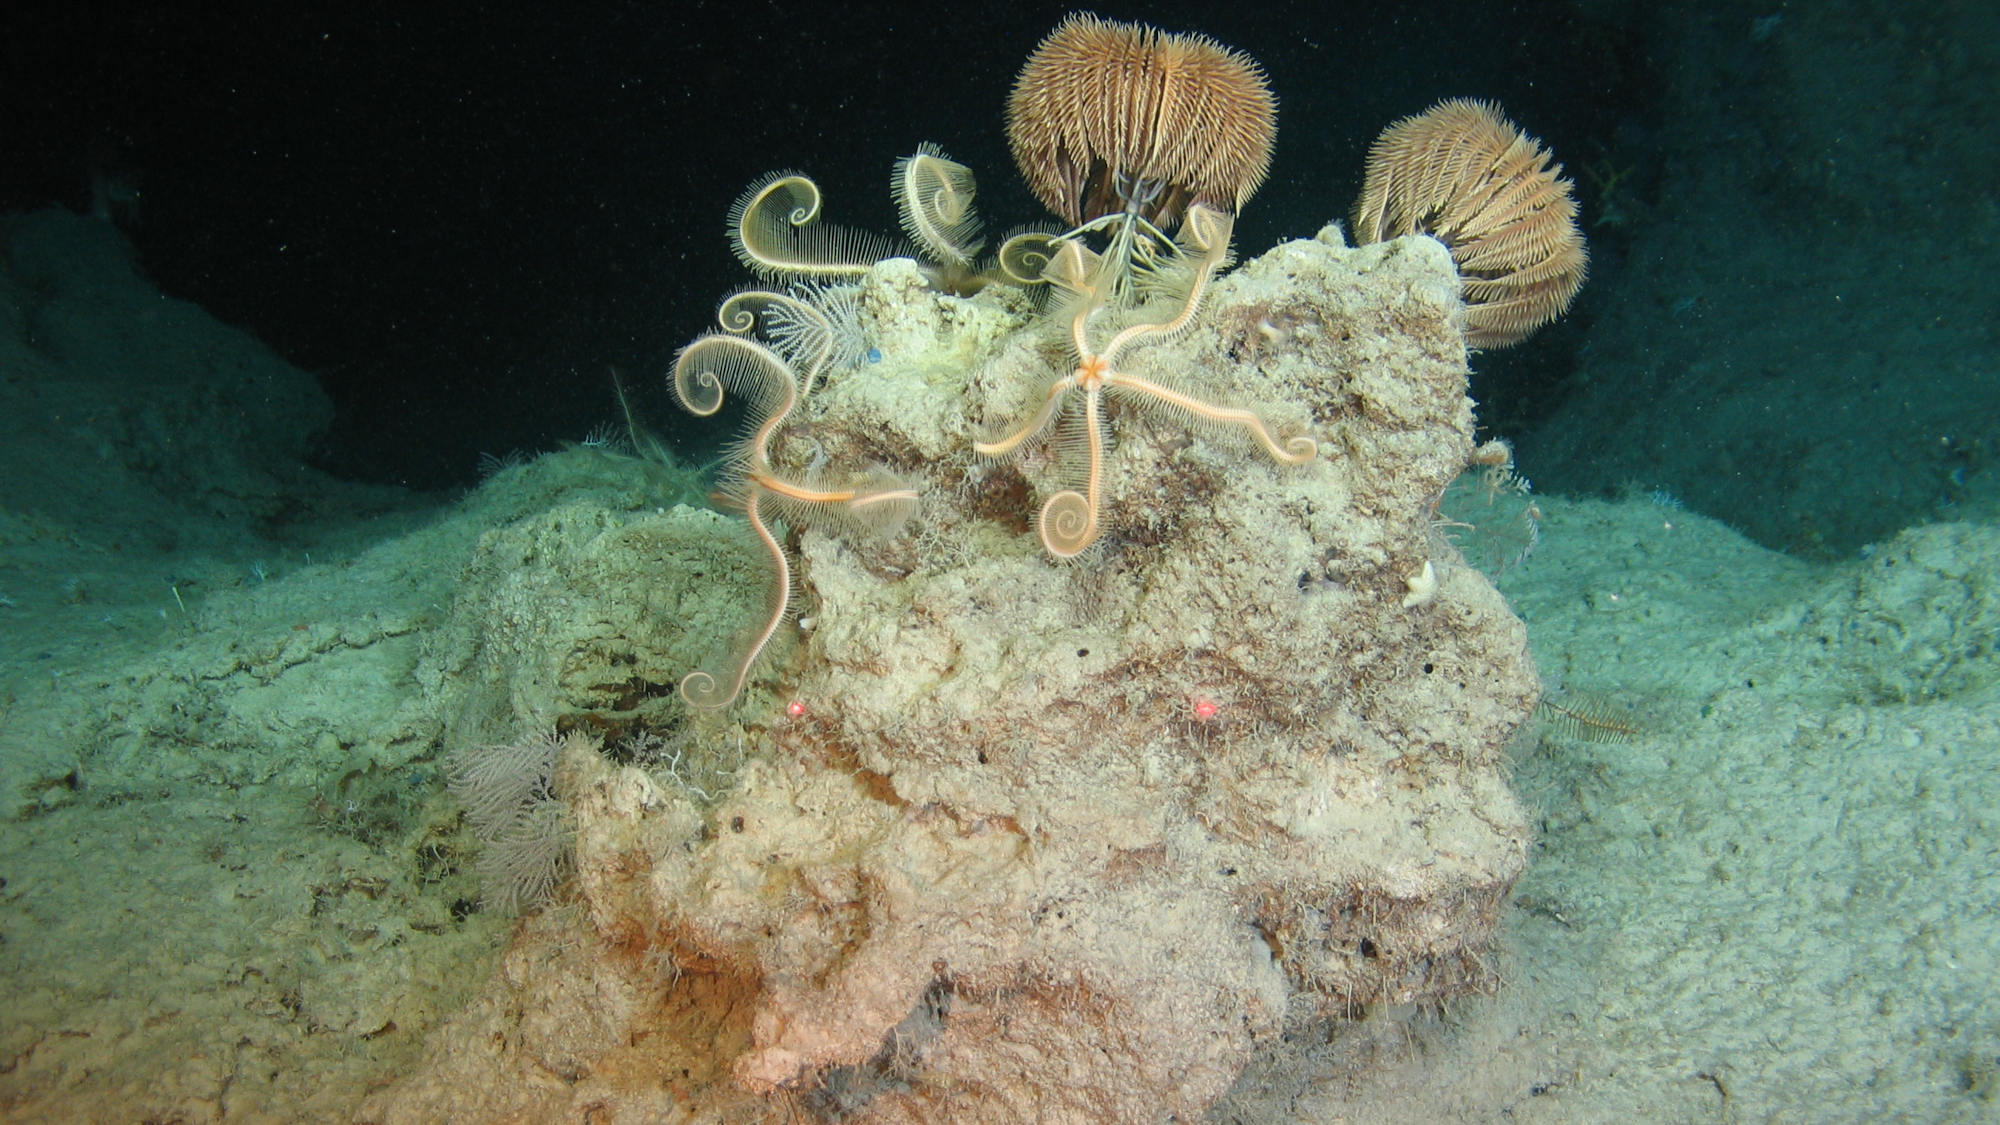 boulders overgrown with brittle stars and Sea lilies